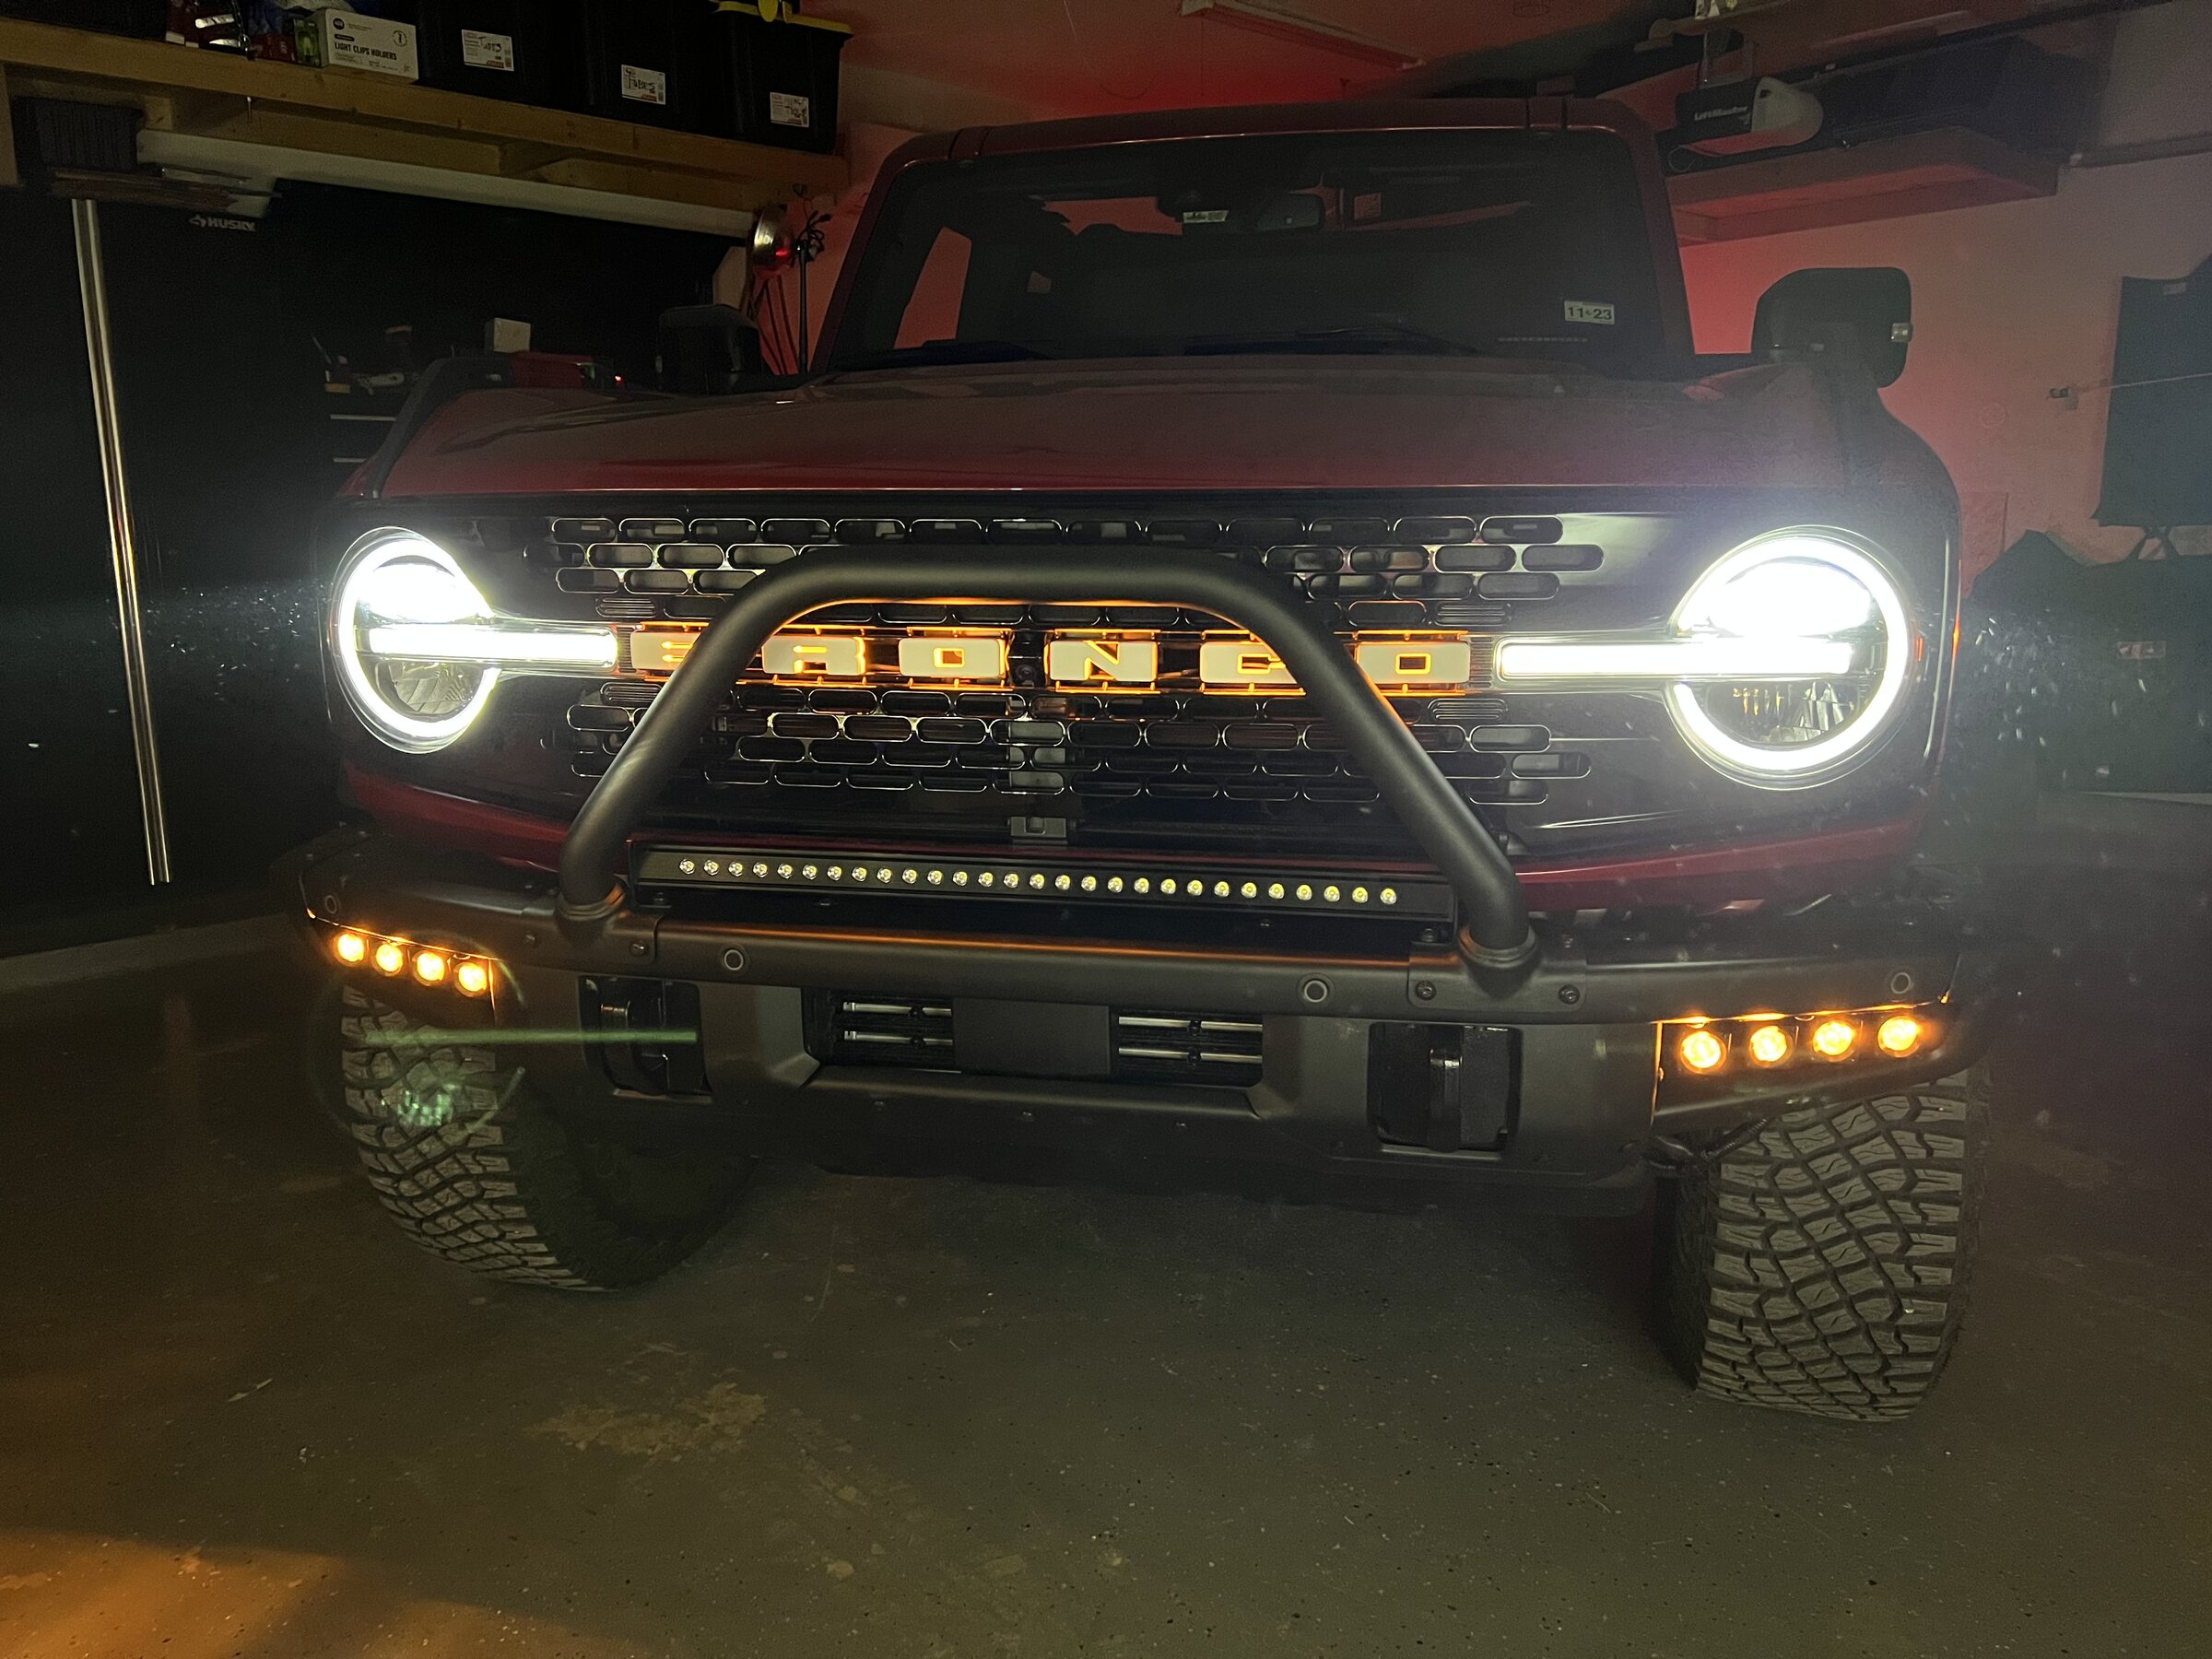 Ford Bronco Amber LED Light Bronco Letters, DRL fogs, and light bar installed F364C034-2F84-4296-ACB2-8941EDEB9D99